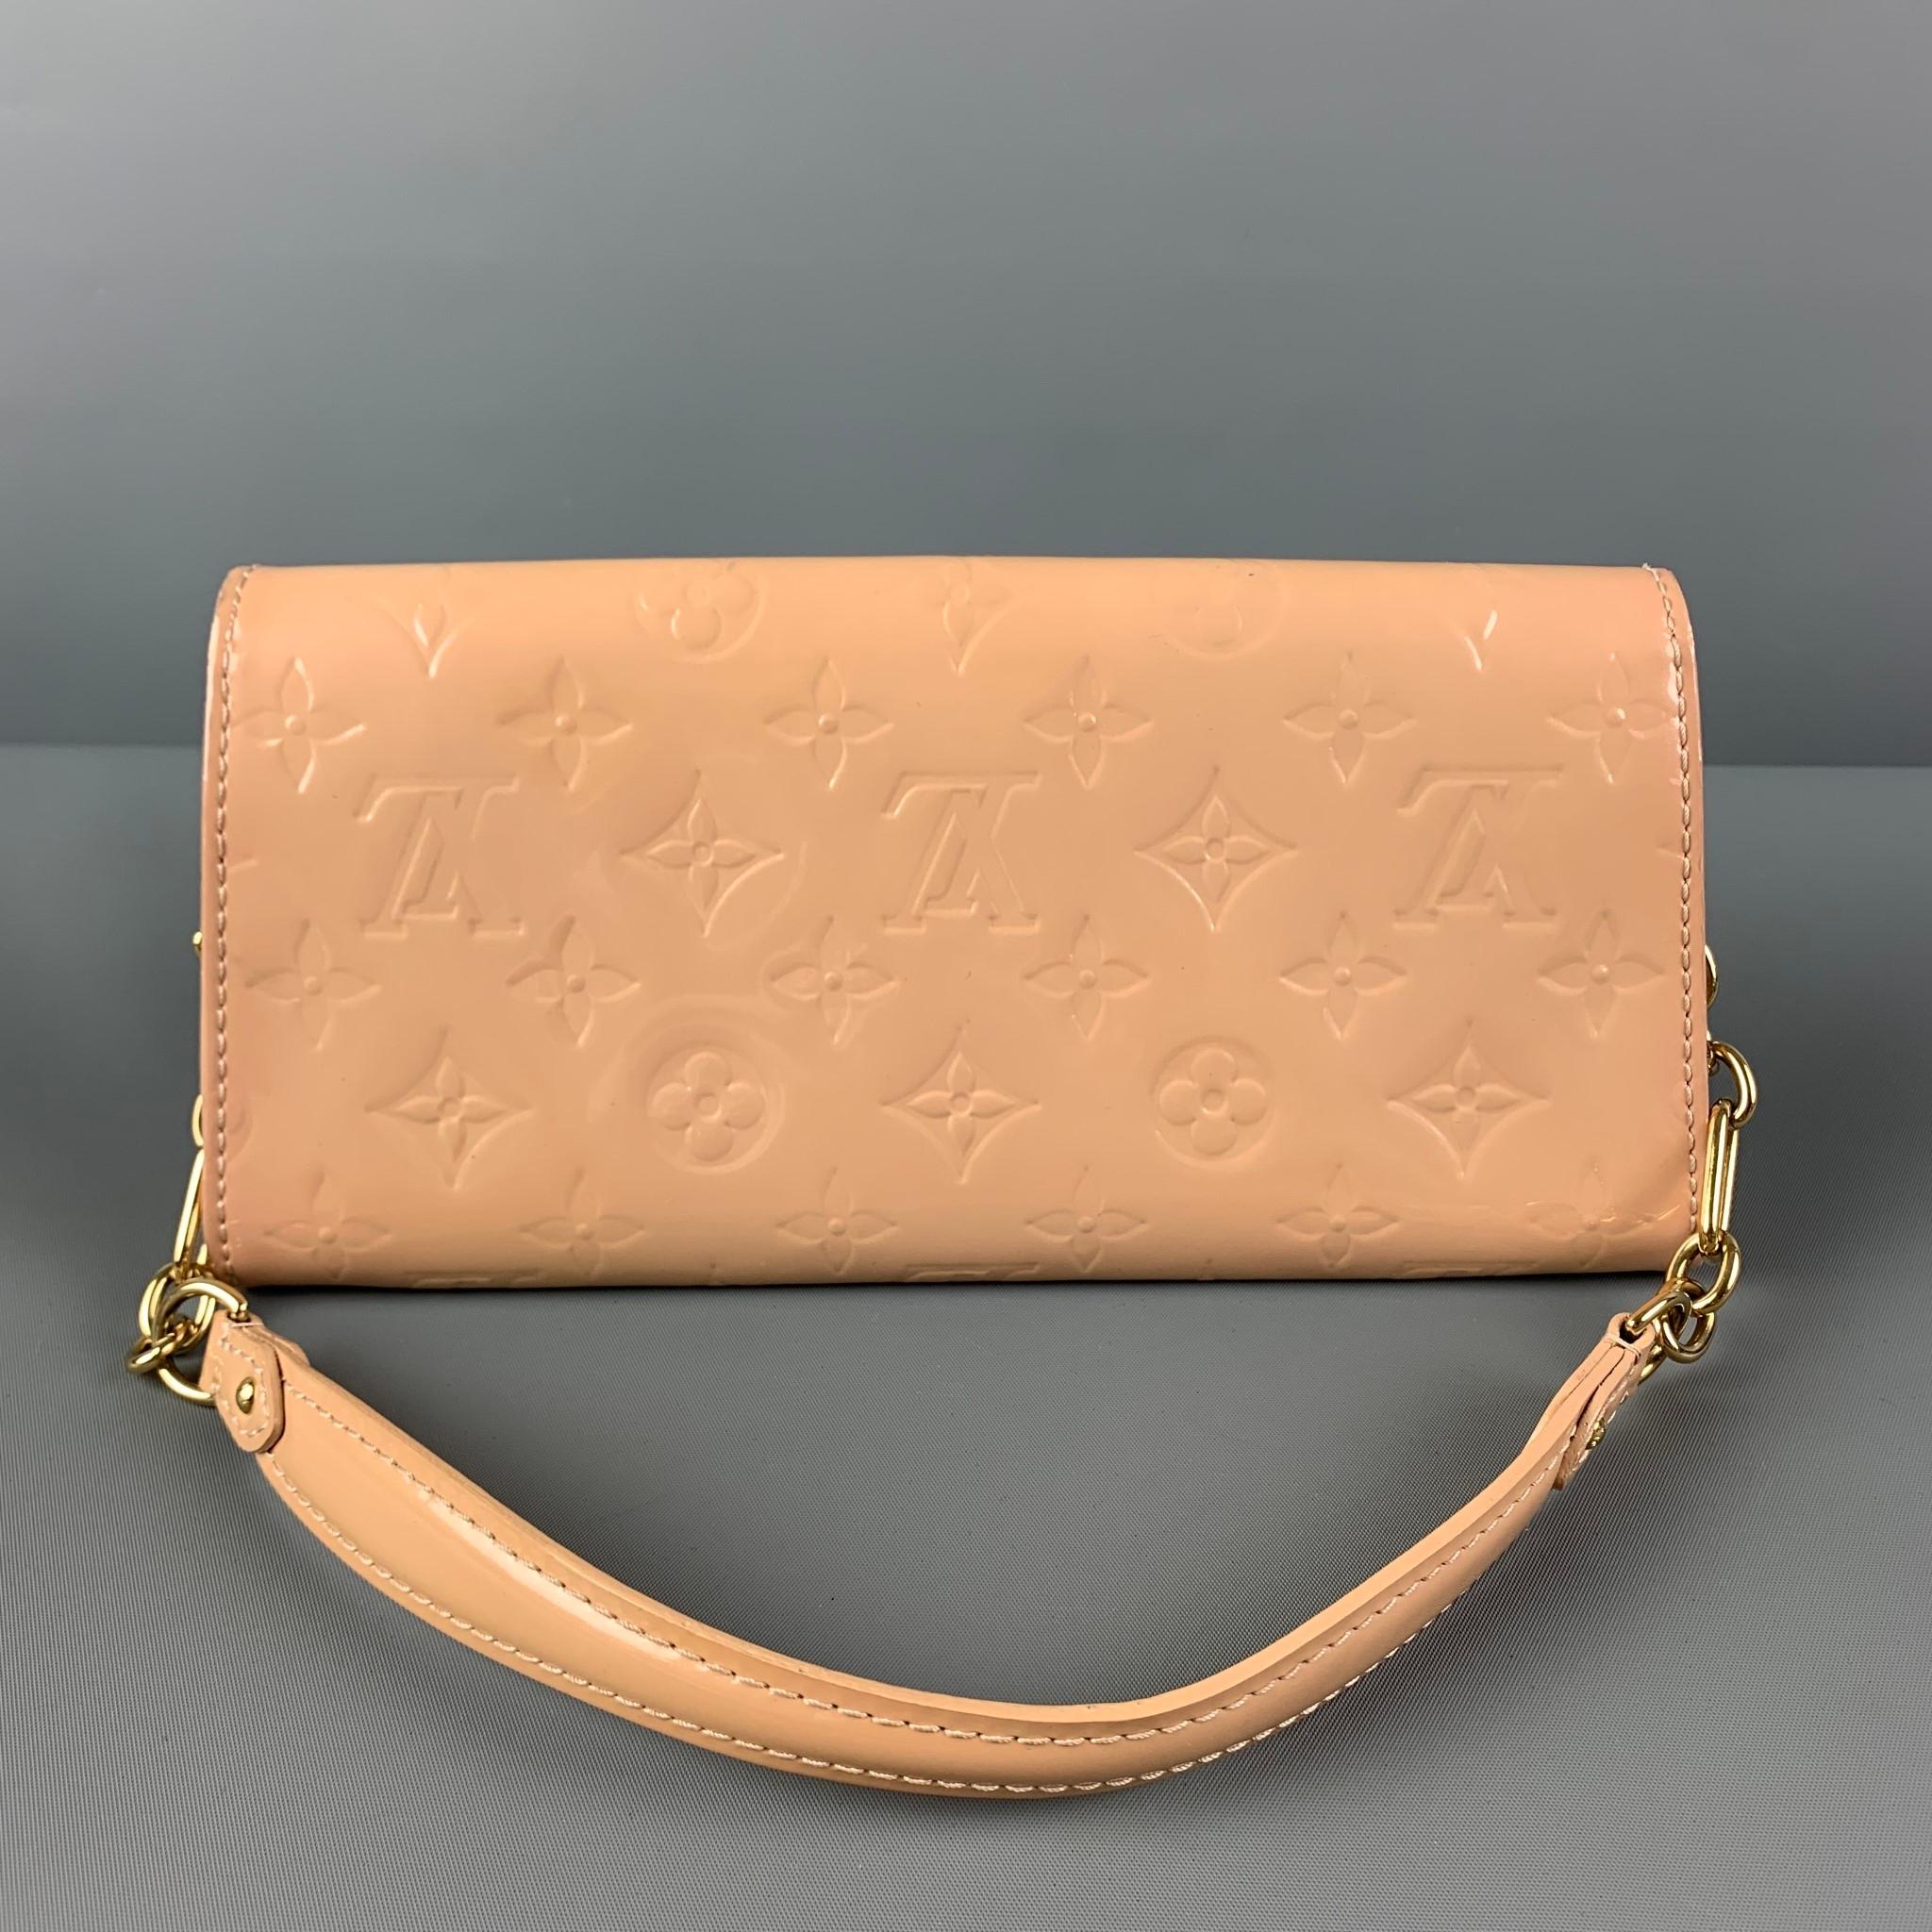 LOUIS VUITTON 'Vernis Sunset Boulevard' clutch comes in a beige embossed monogram patent leather featuring a front logo plaque, gold tone hardware, inner slots, detachable chain, and a snap button closure. Includes dust bag. Made in France.

Very